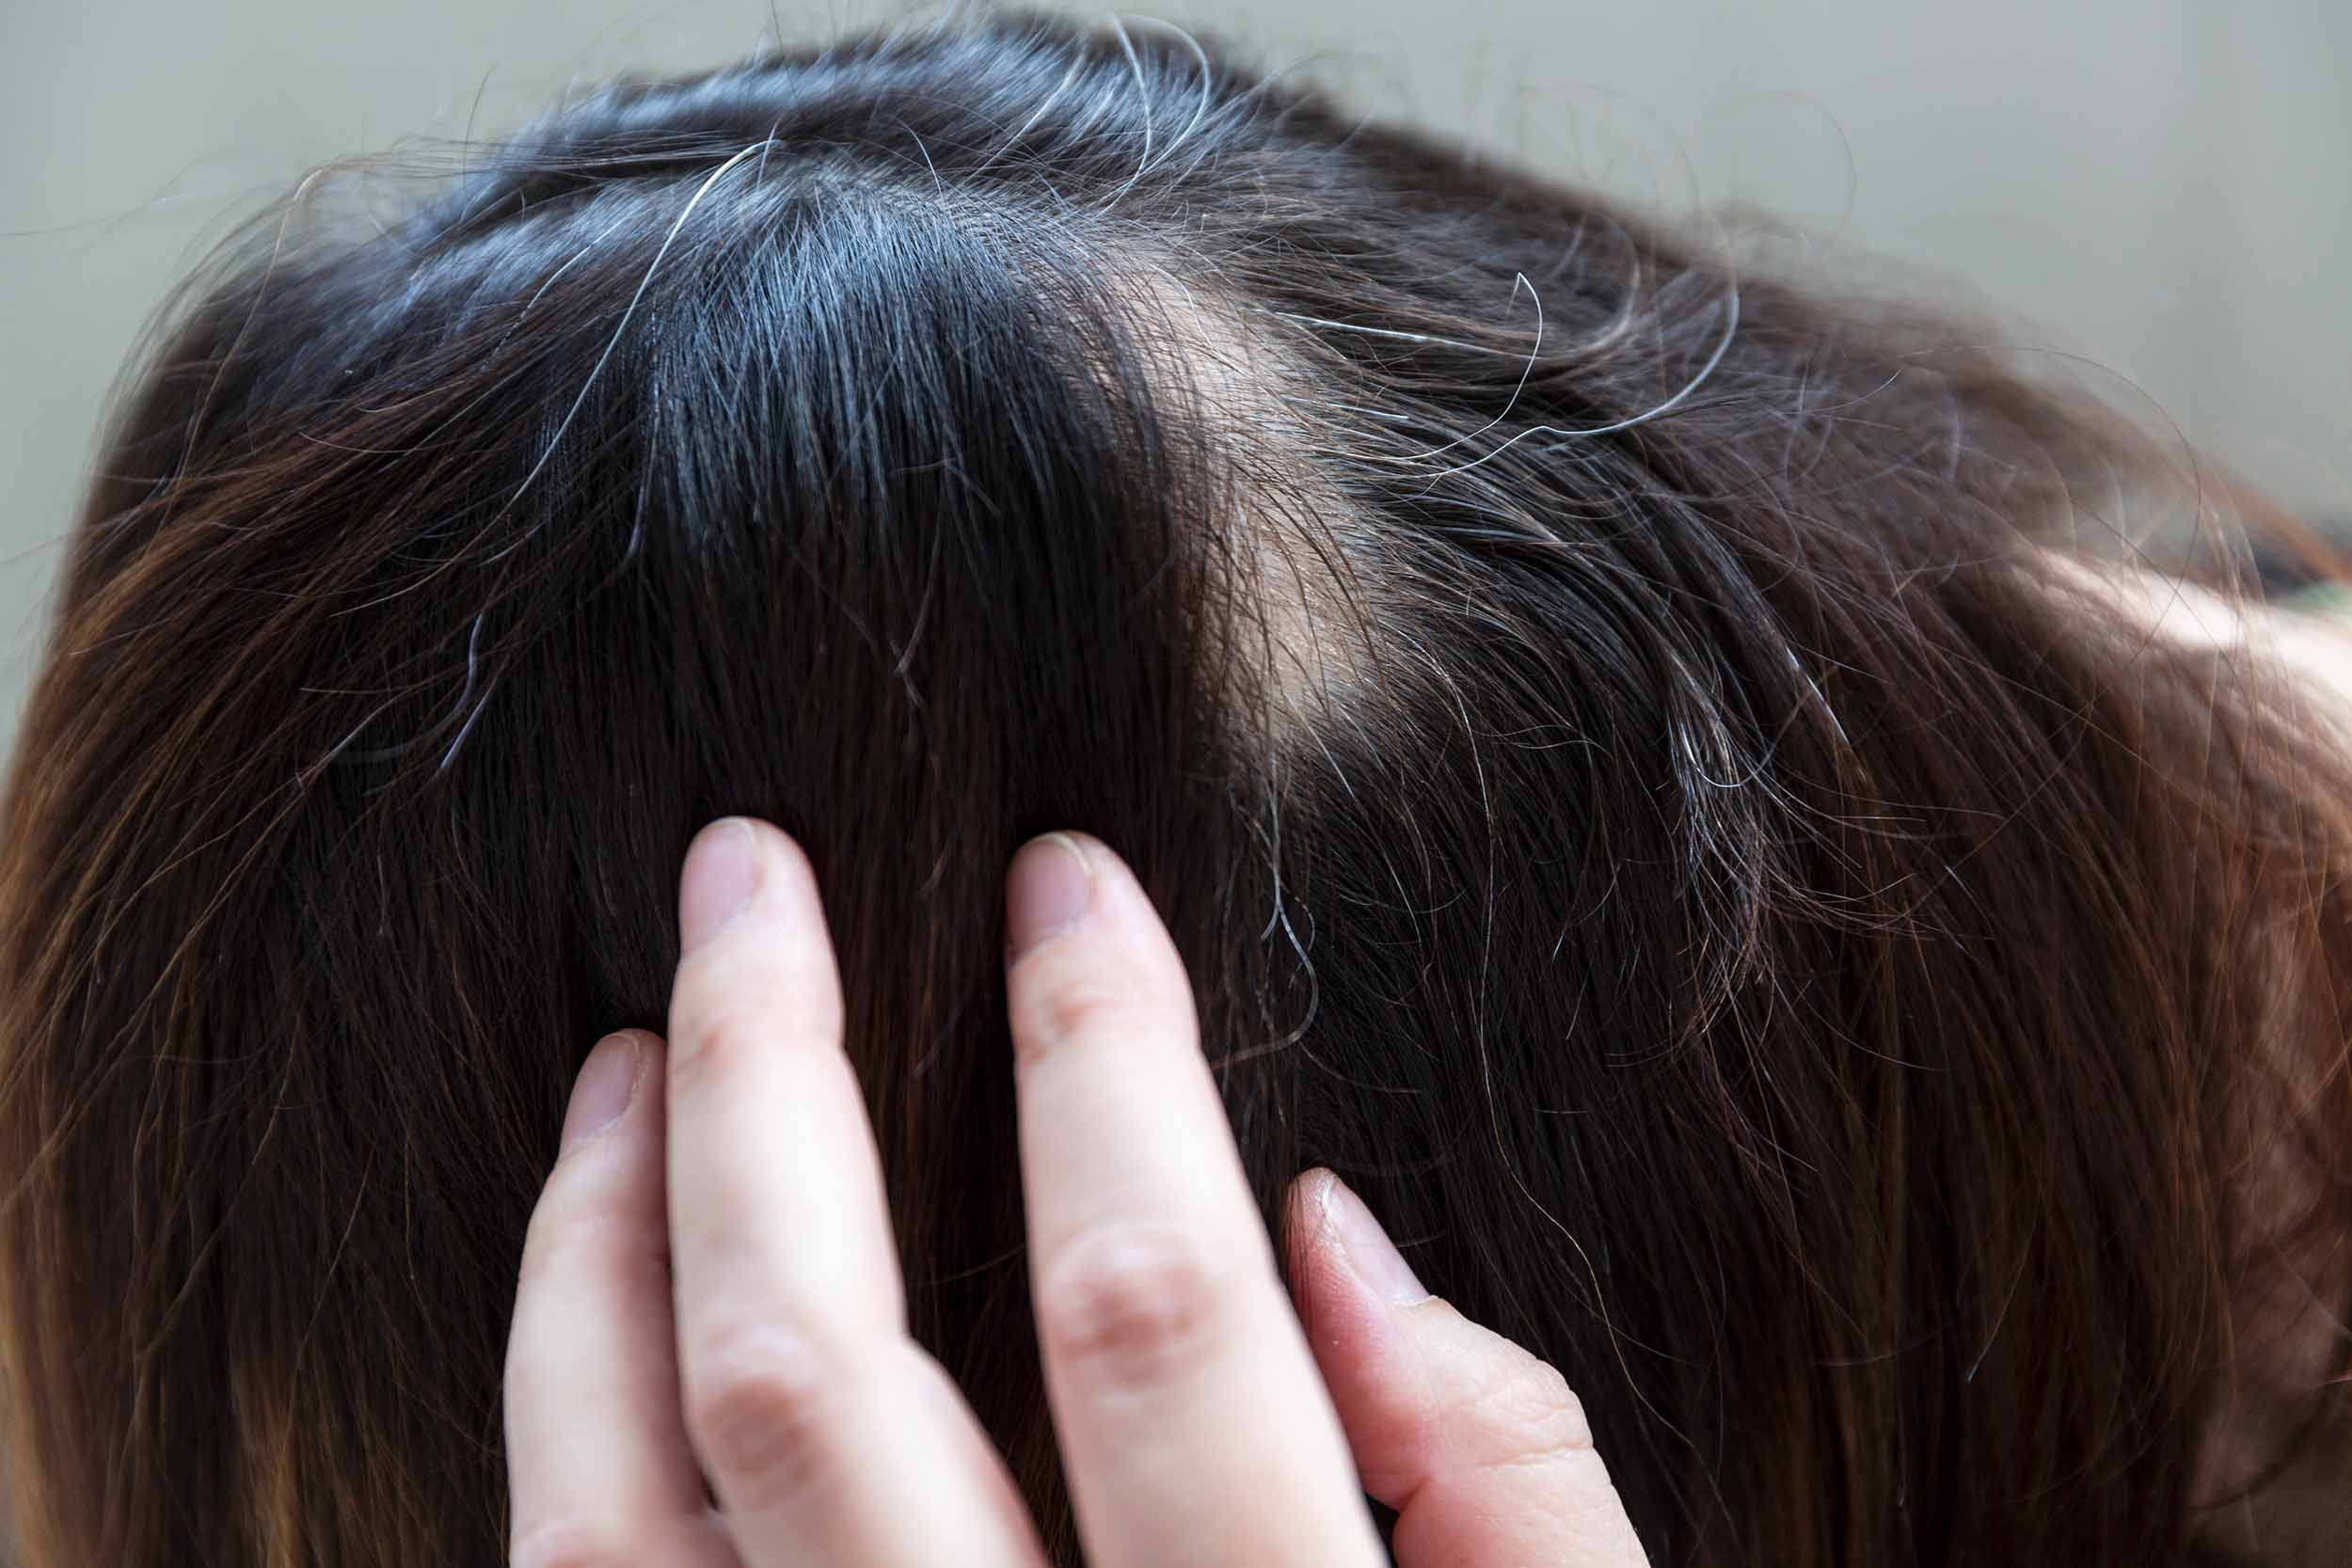 how to stop alopecia areata from spreading